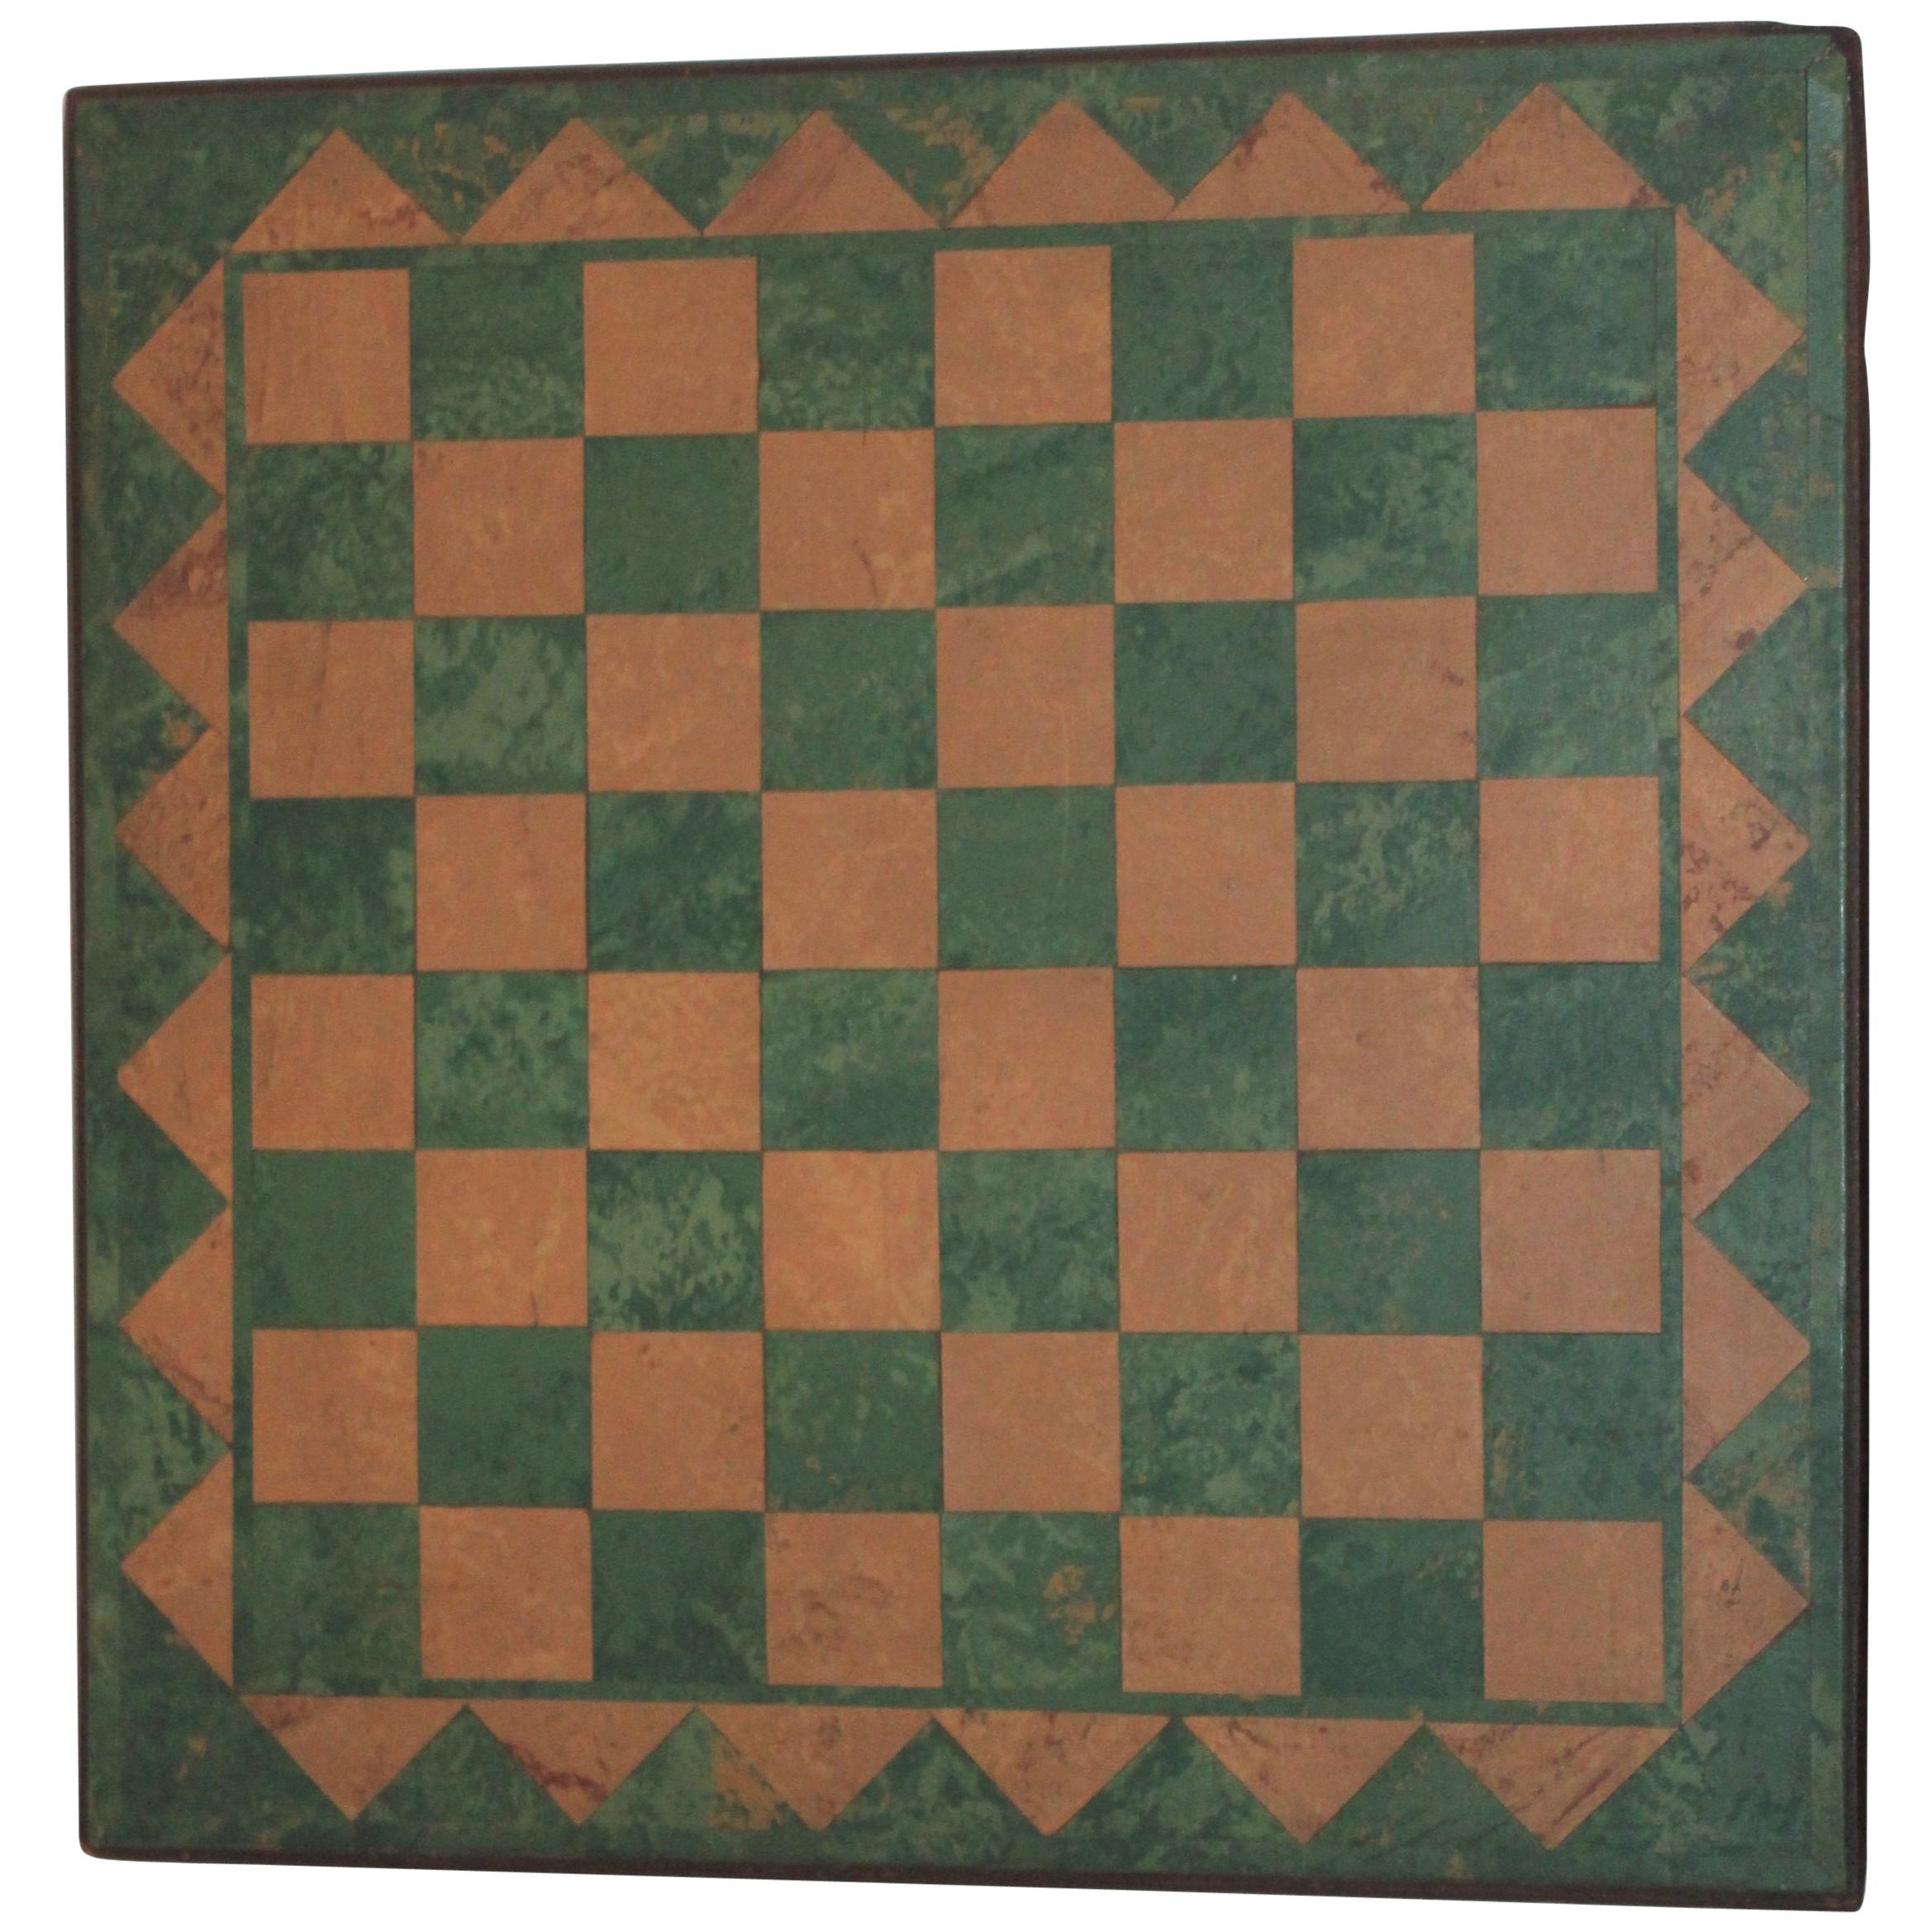 Geometric Hand Crafted Game Board